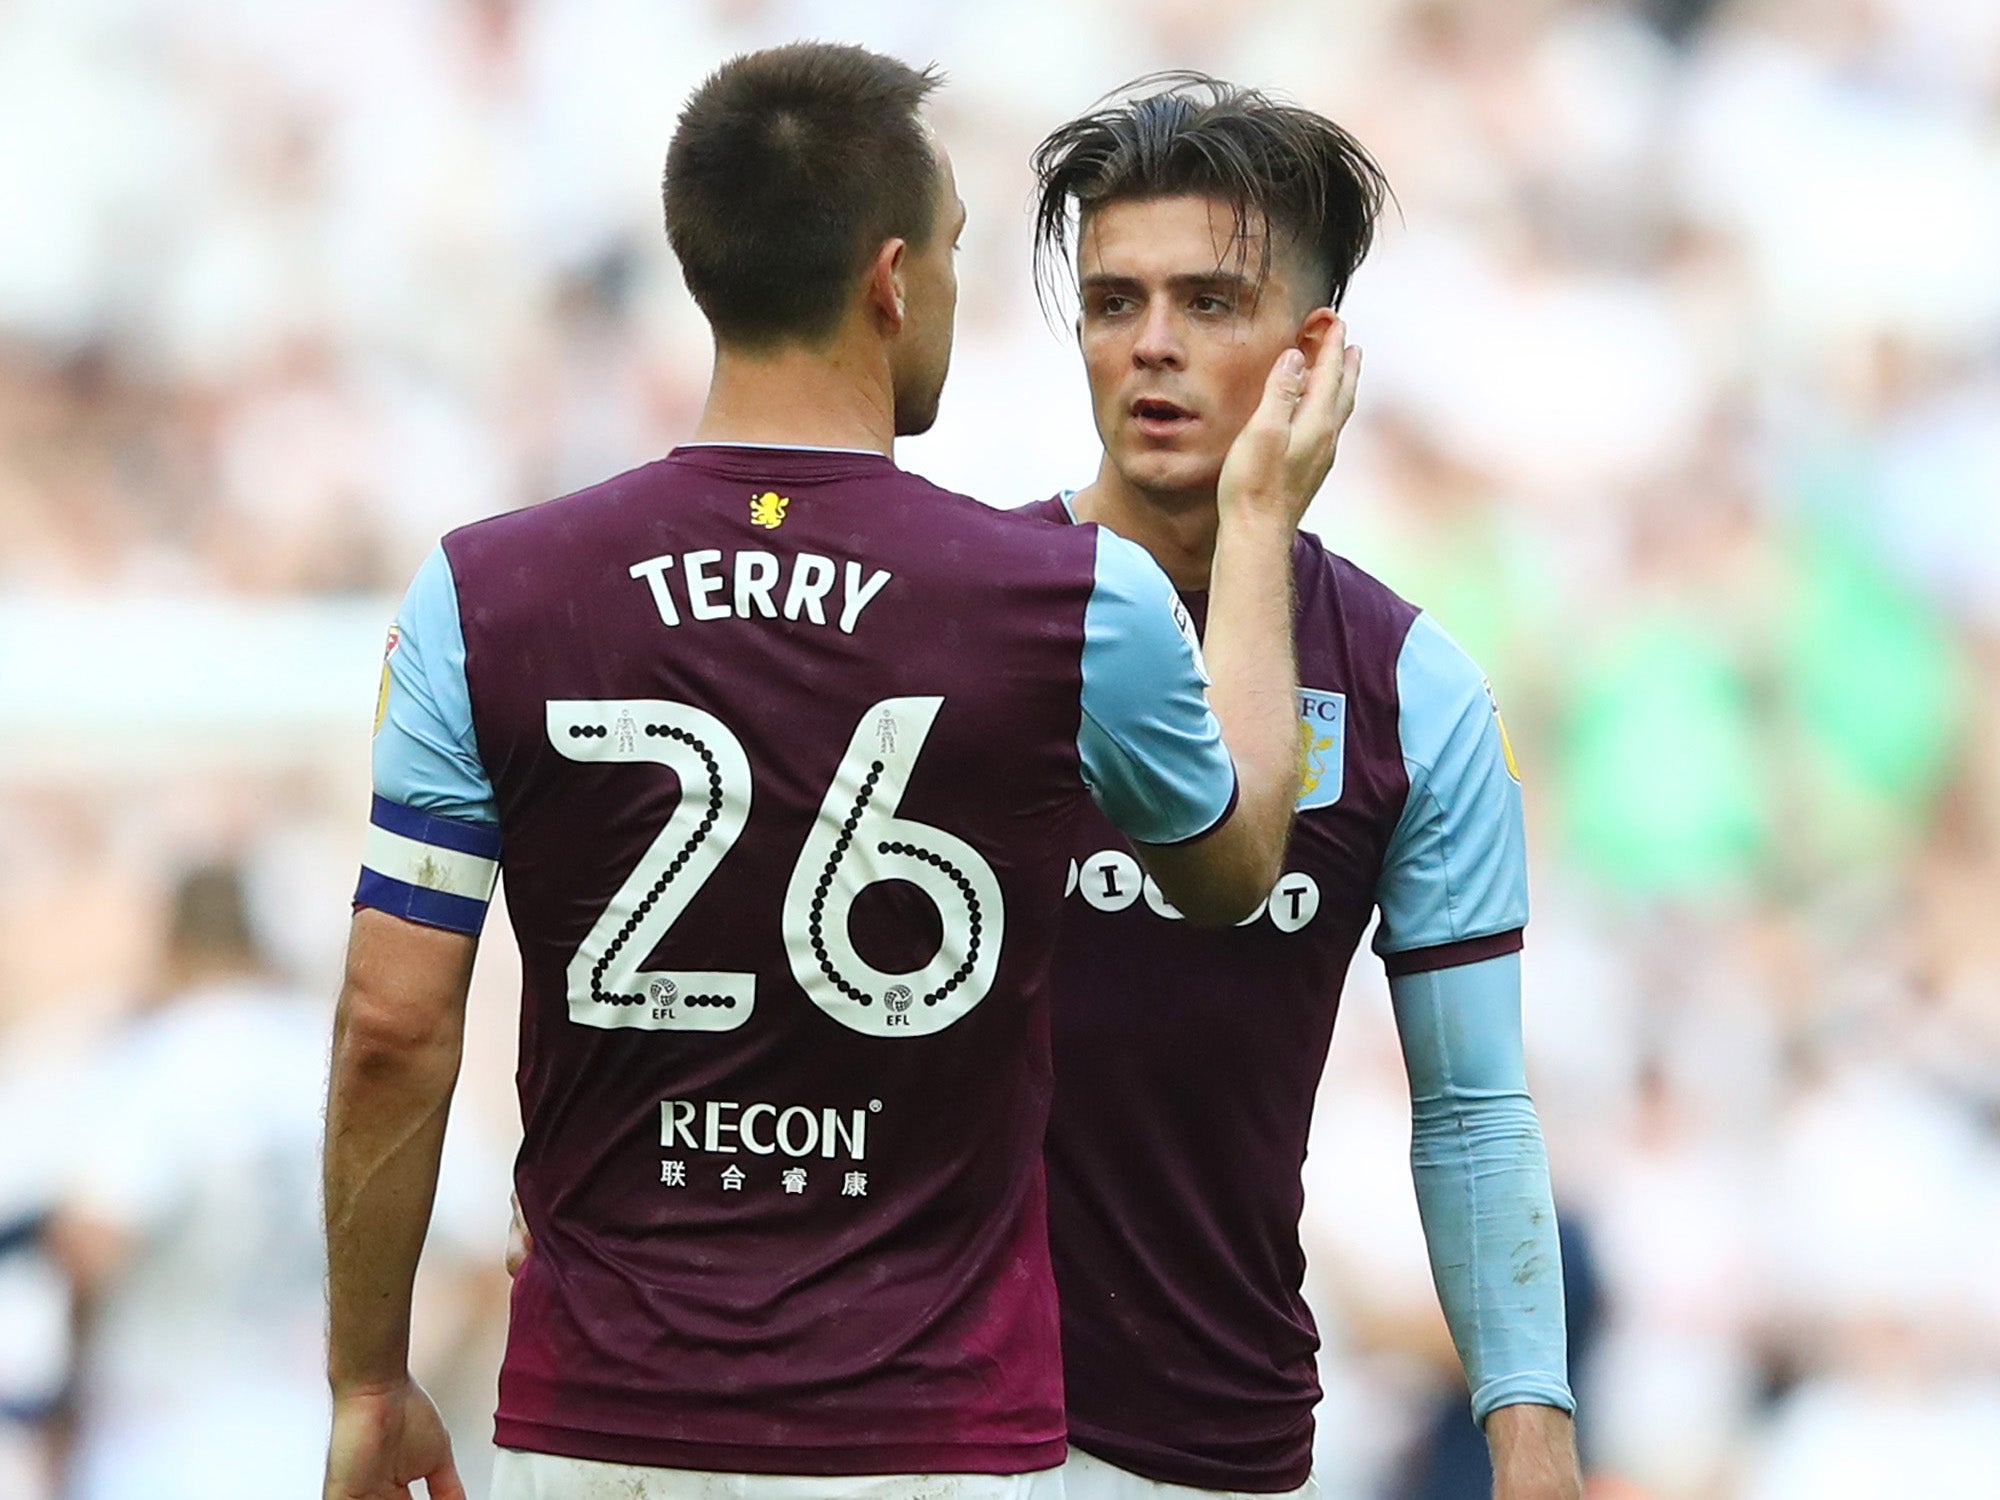 Terry and Grealish were left consoling one another in the middle of the pitch